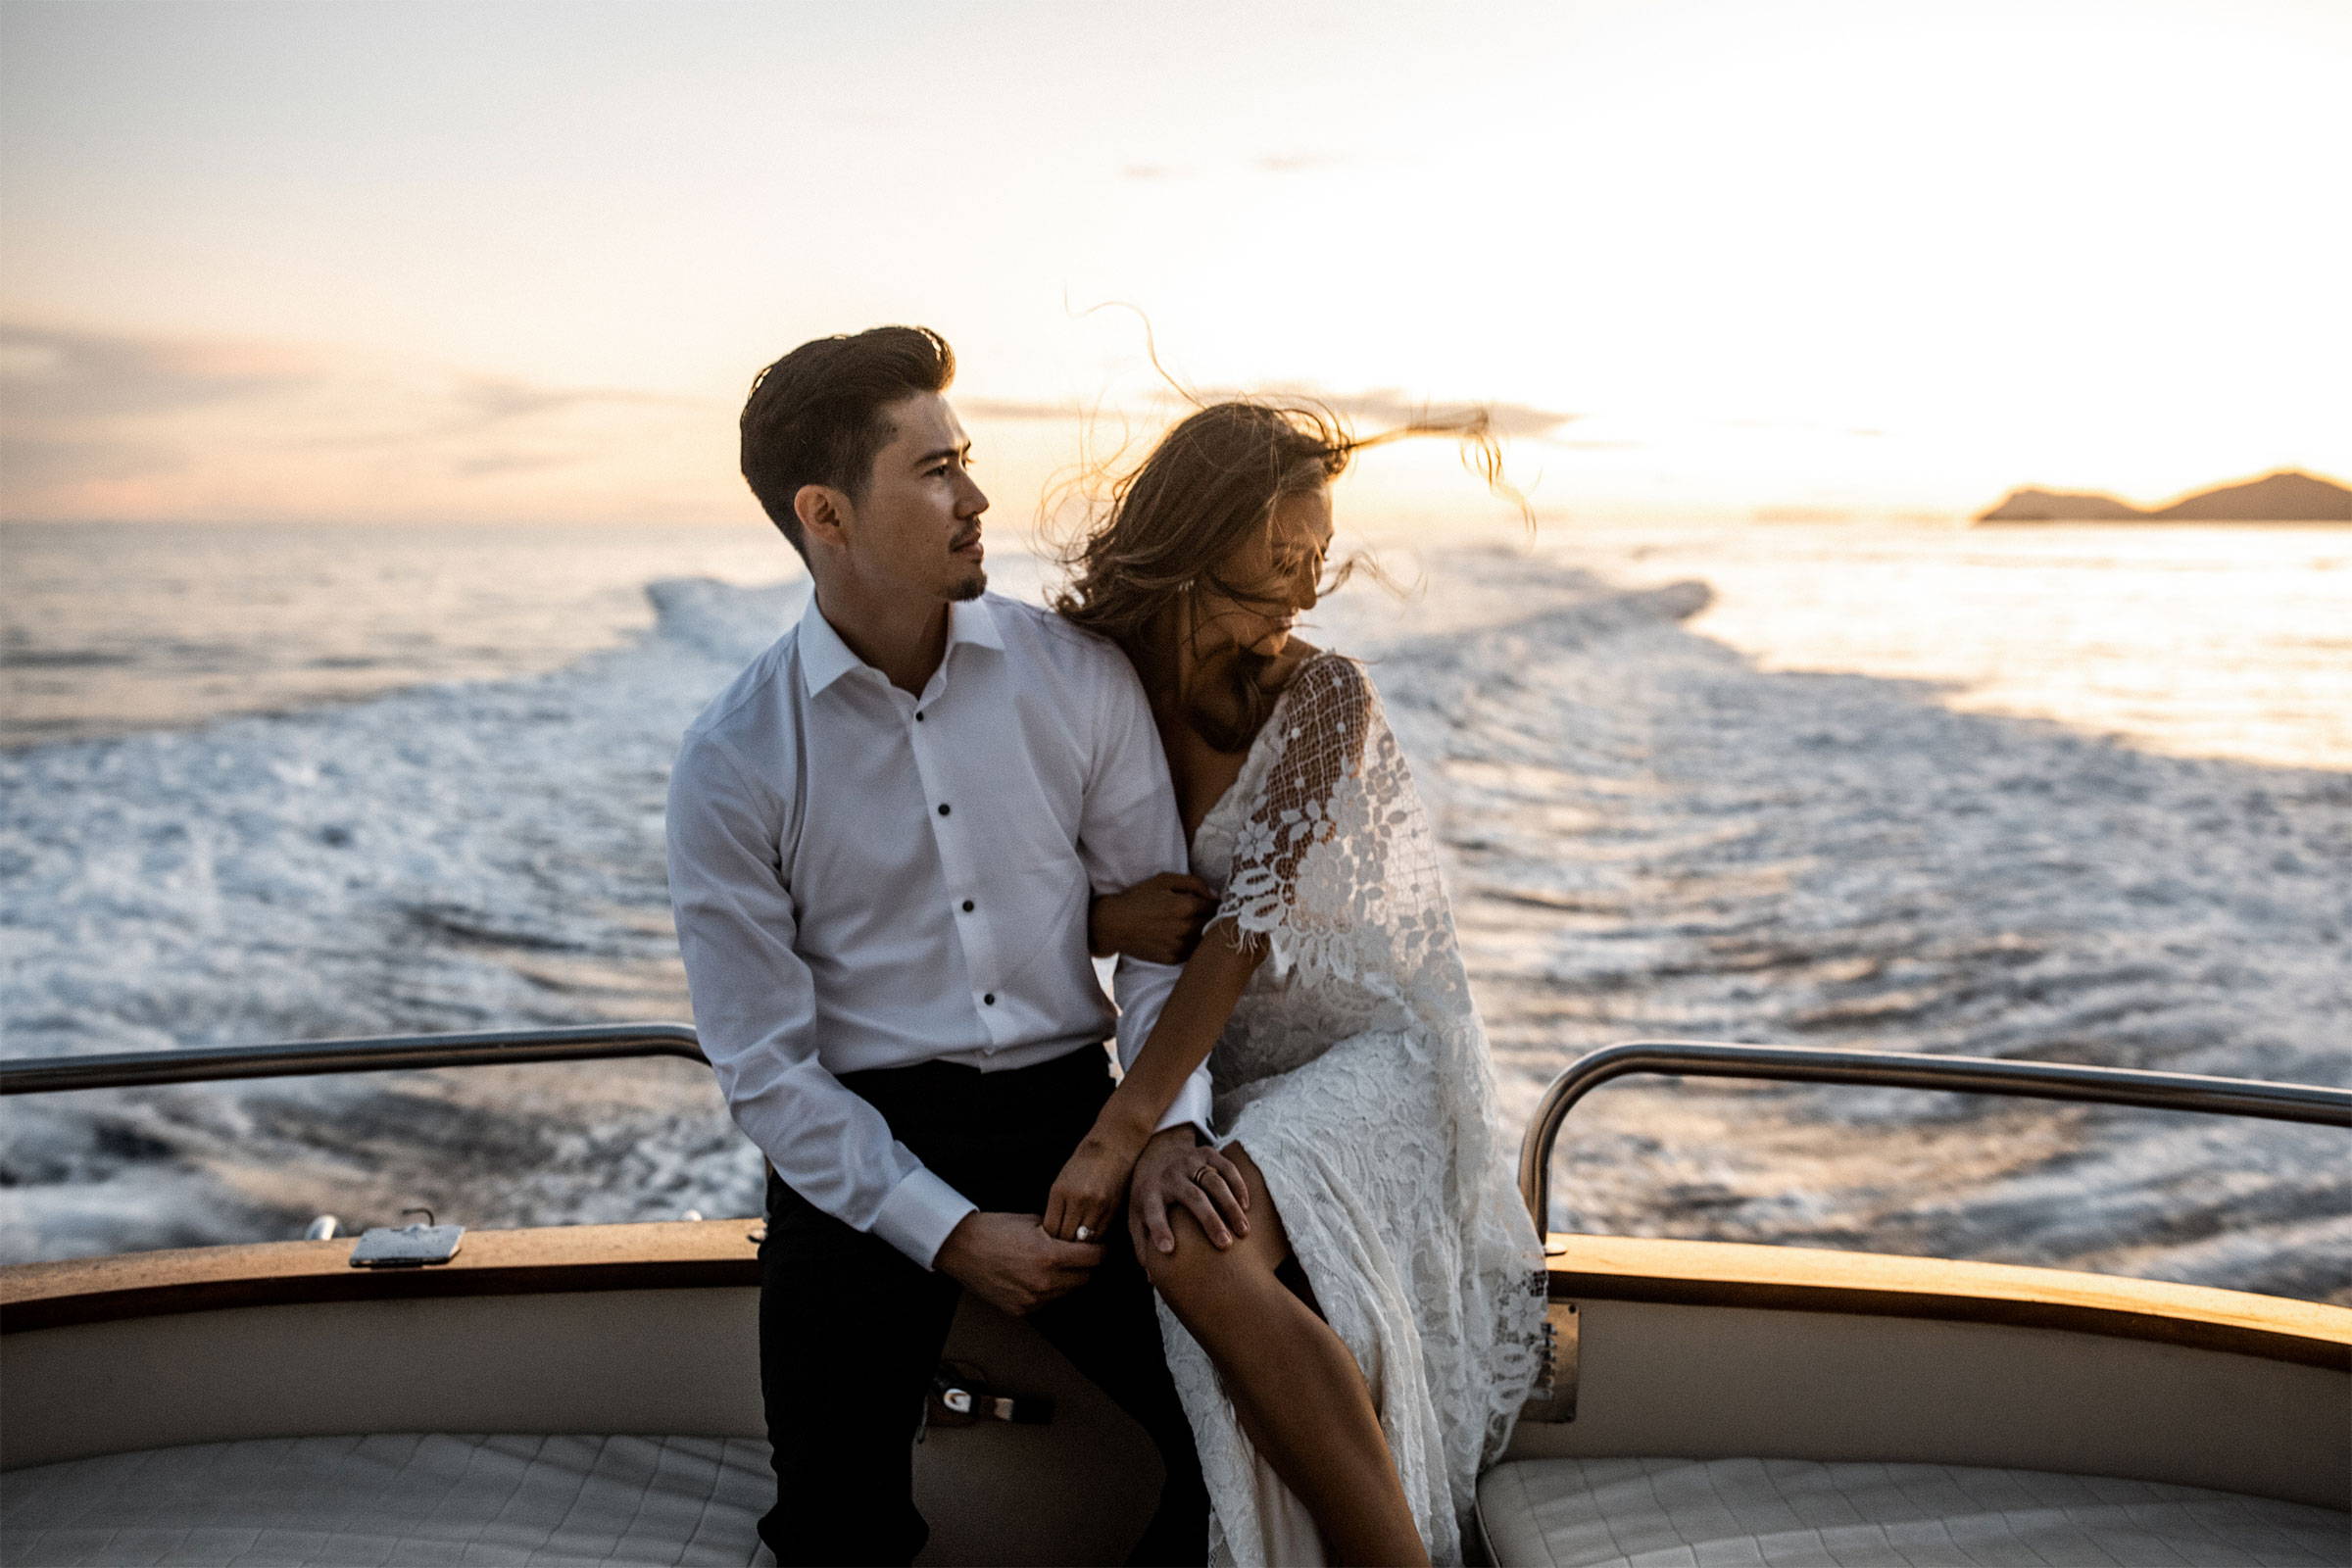 Bride and groom sitting on the back of a Yacht driving on the river at sunset